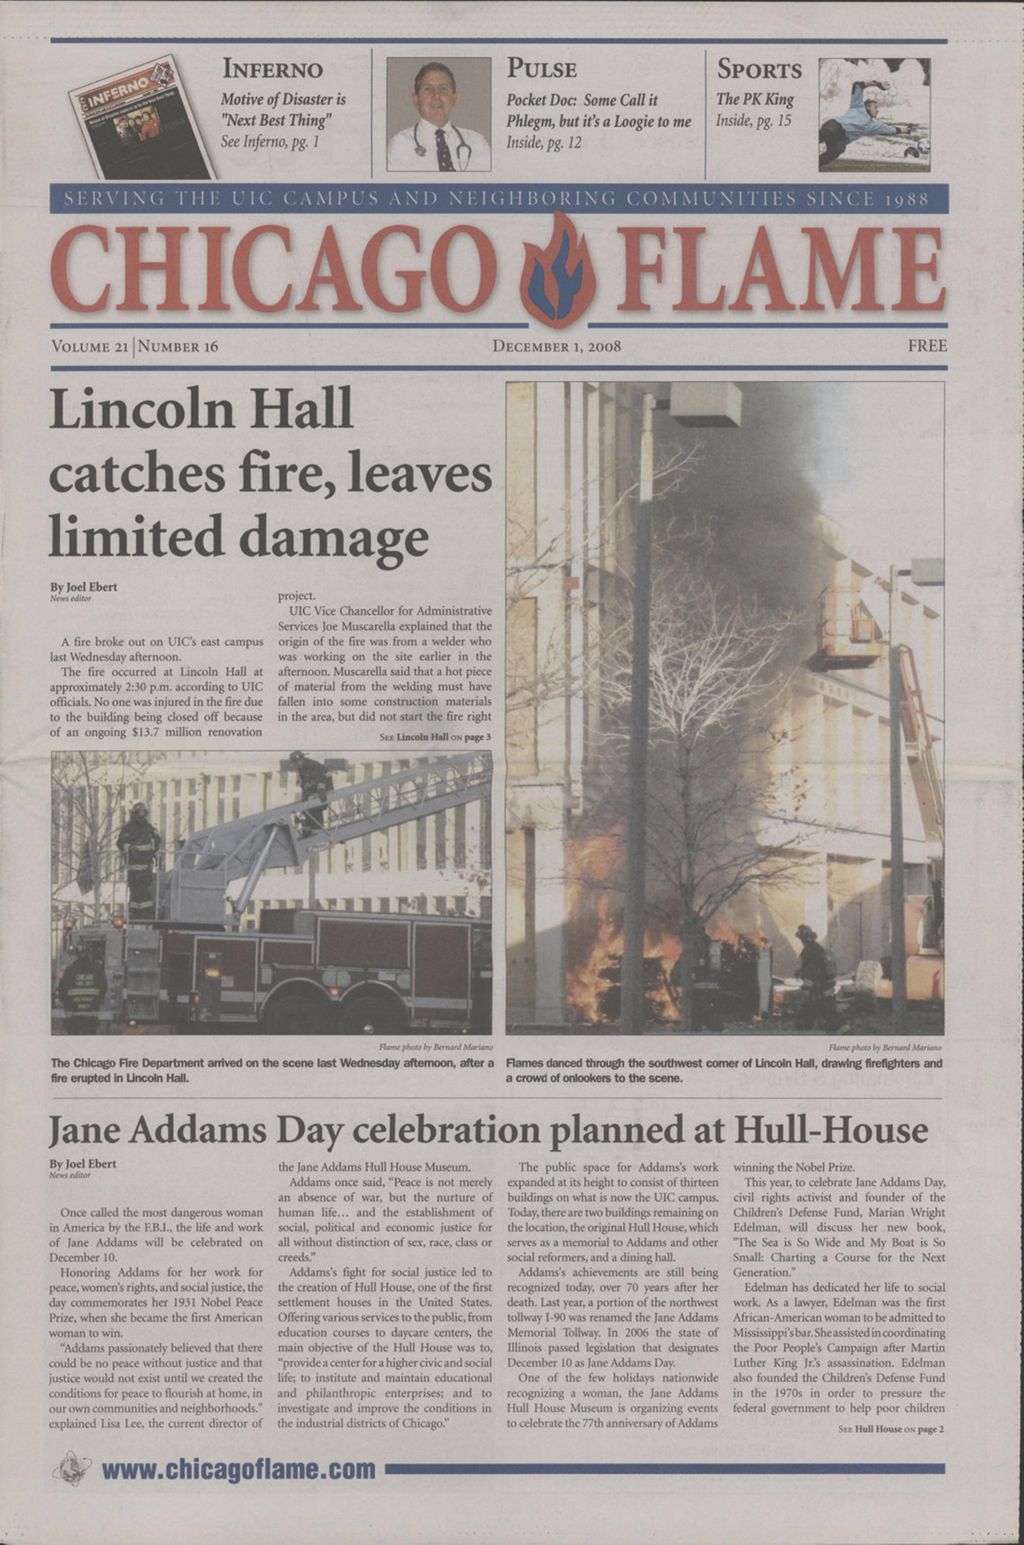 Miniature of Chicago Flame (December 1, 2008)